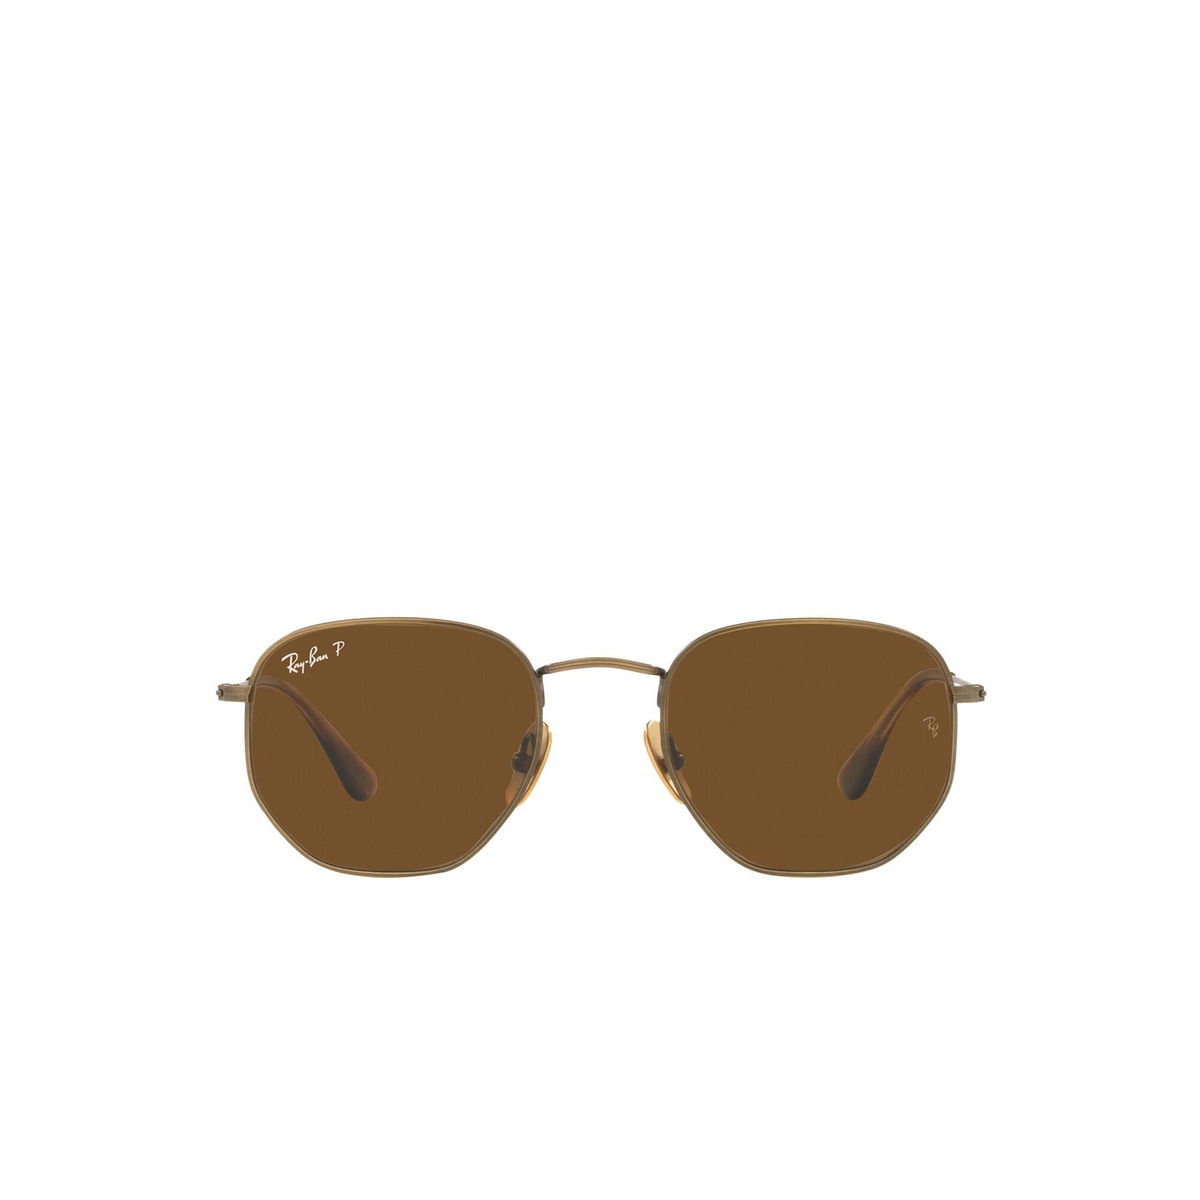 Ray-Ban® Irregular Sunglasses: Hexagonal RB8148 color Demigloss Antique Gold 920757 - front view.